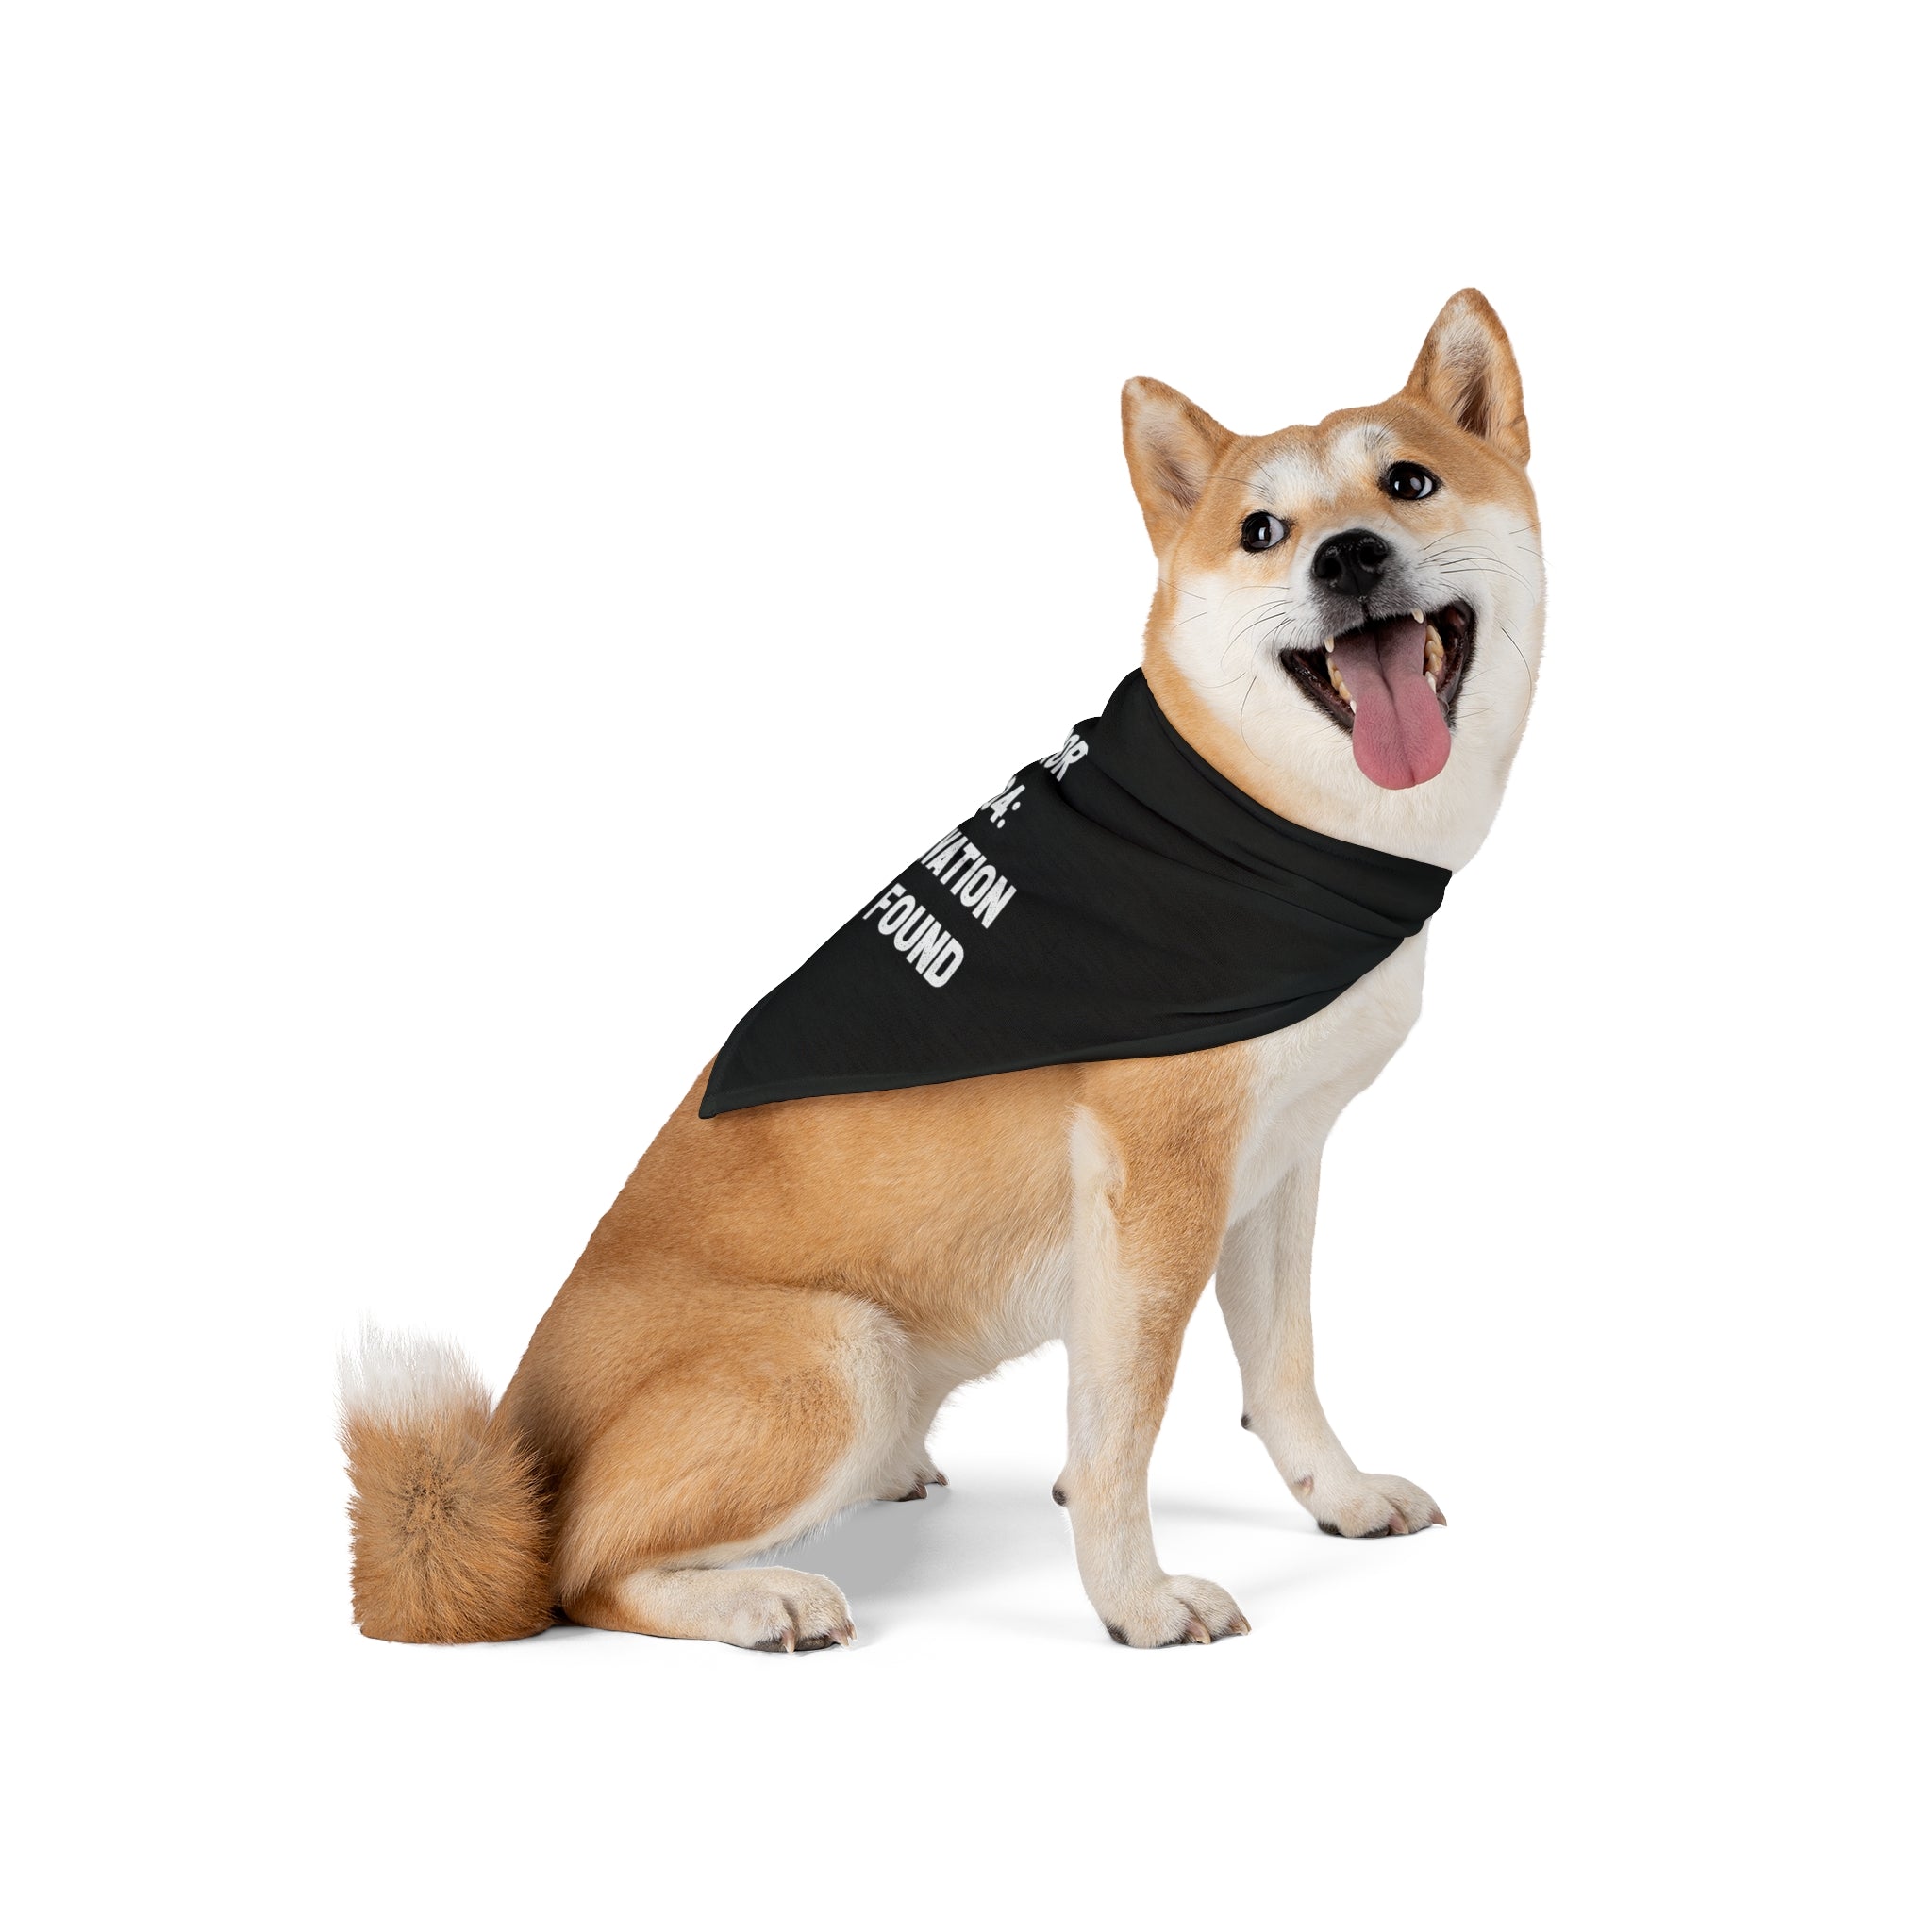 A Shiba Inu dog sits with its mouth open and tongue out, wearing a soft-spun polyester black Error 404: Motivation not found - Pet Bandana.